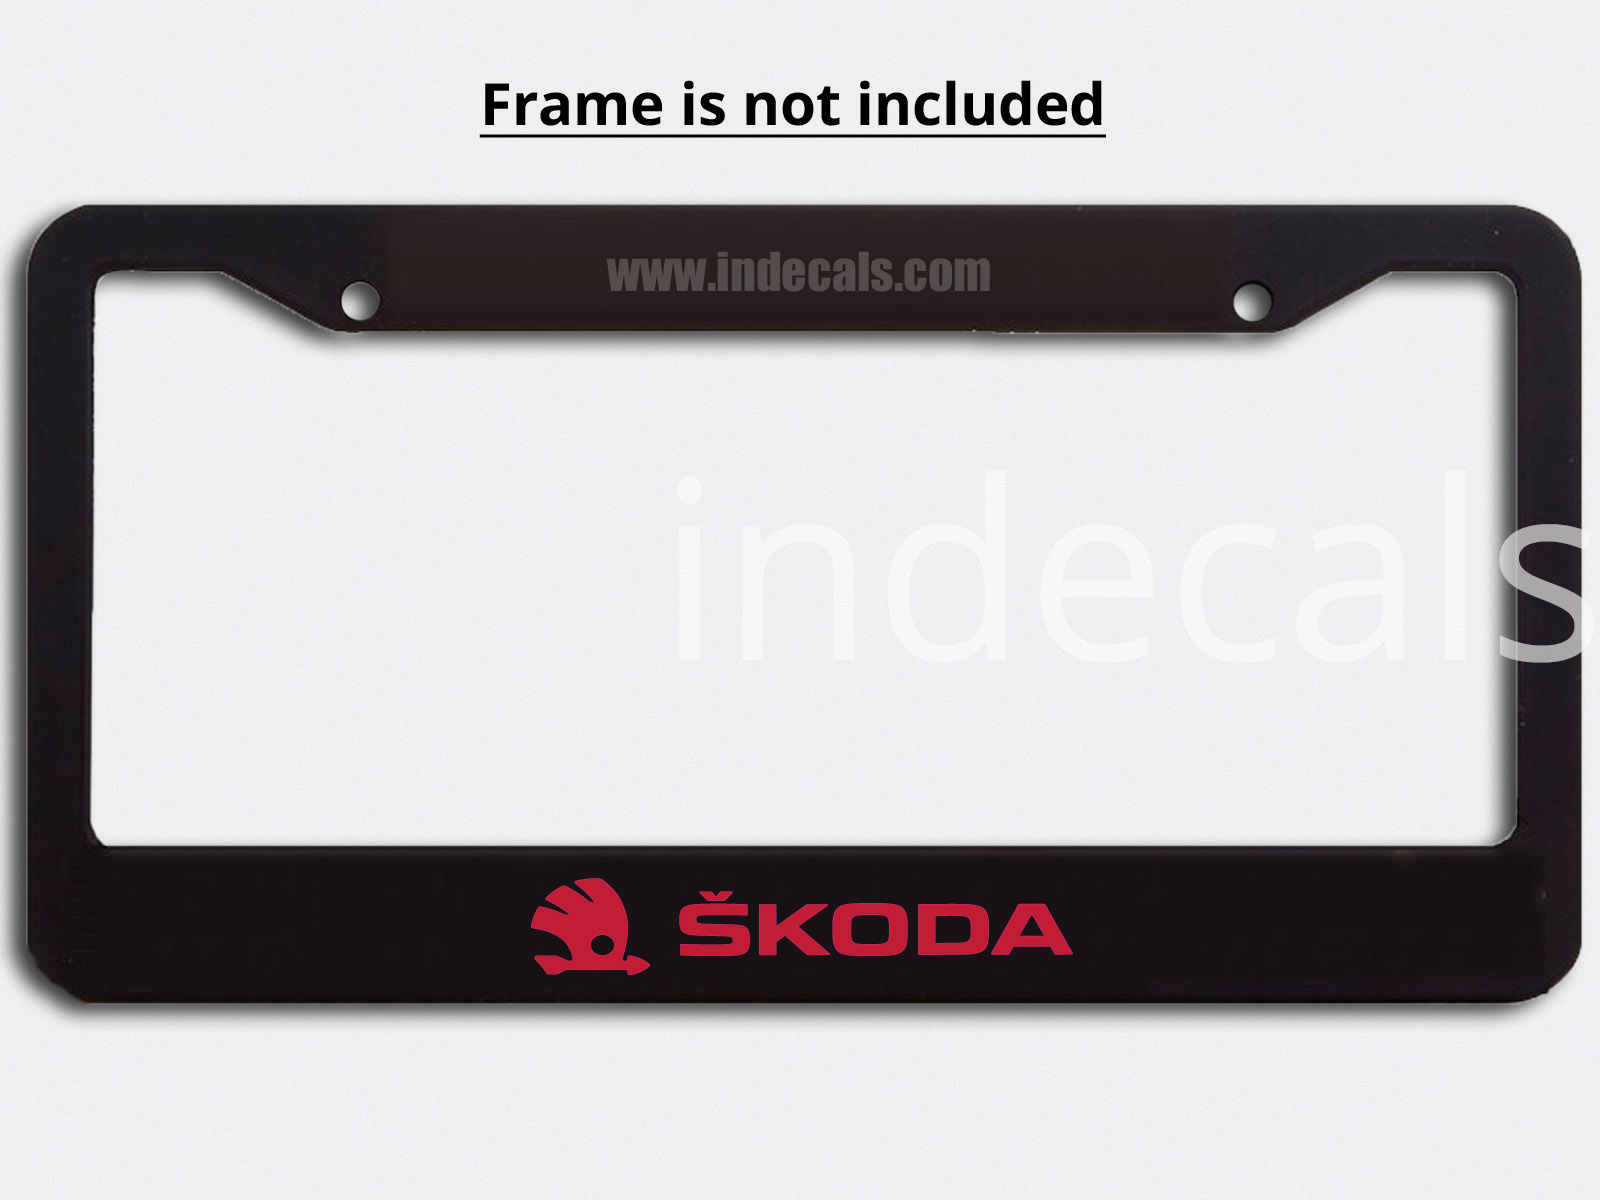 3 x Skoda Stickers for Plate Frame - Red